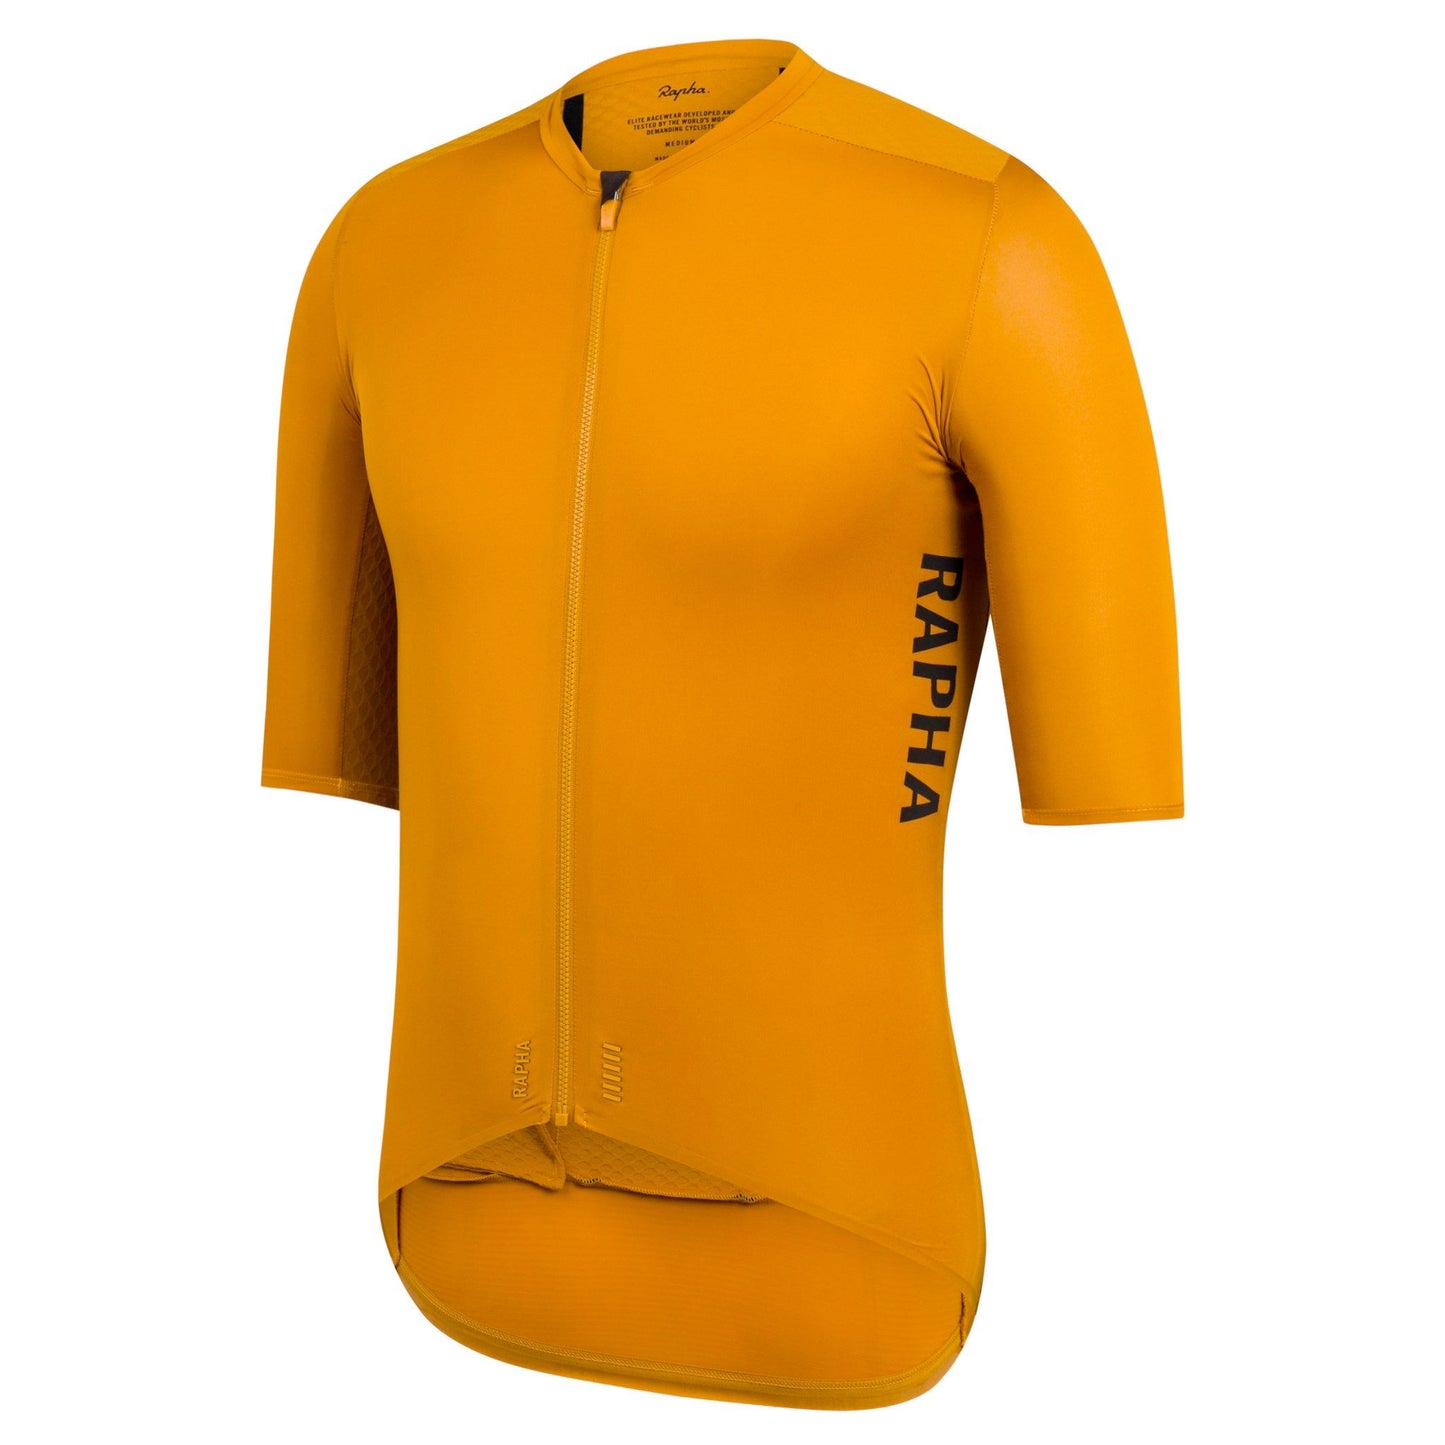 Rapha Mens Pro Team Aero Jersey, Mustard, buy online at Woolys Wheels with free delivery!